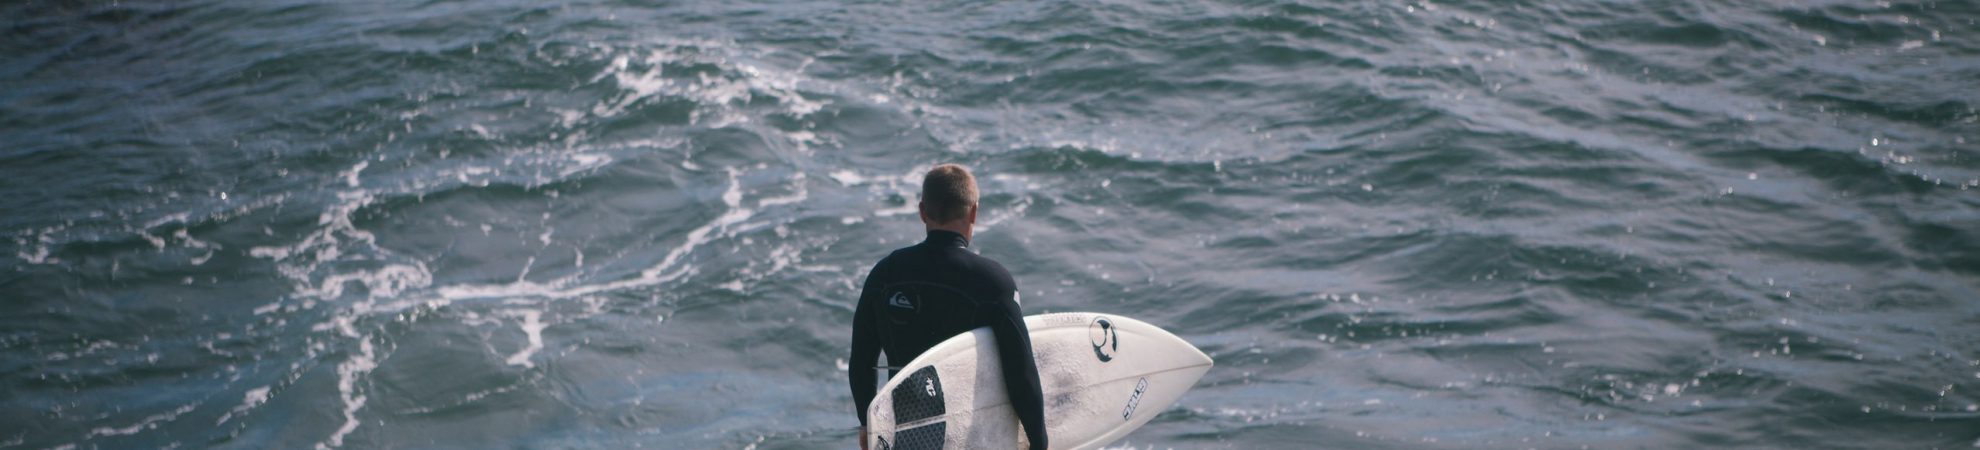 Surfing Gear - Essential Equipment to Get You Started